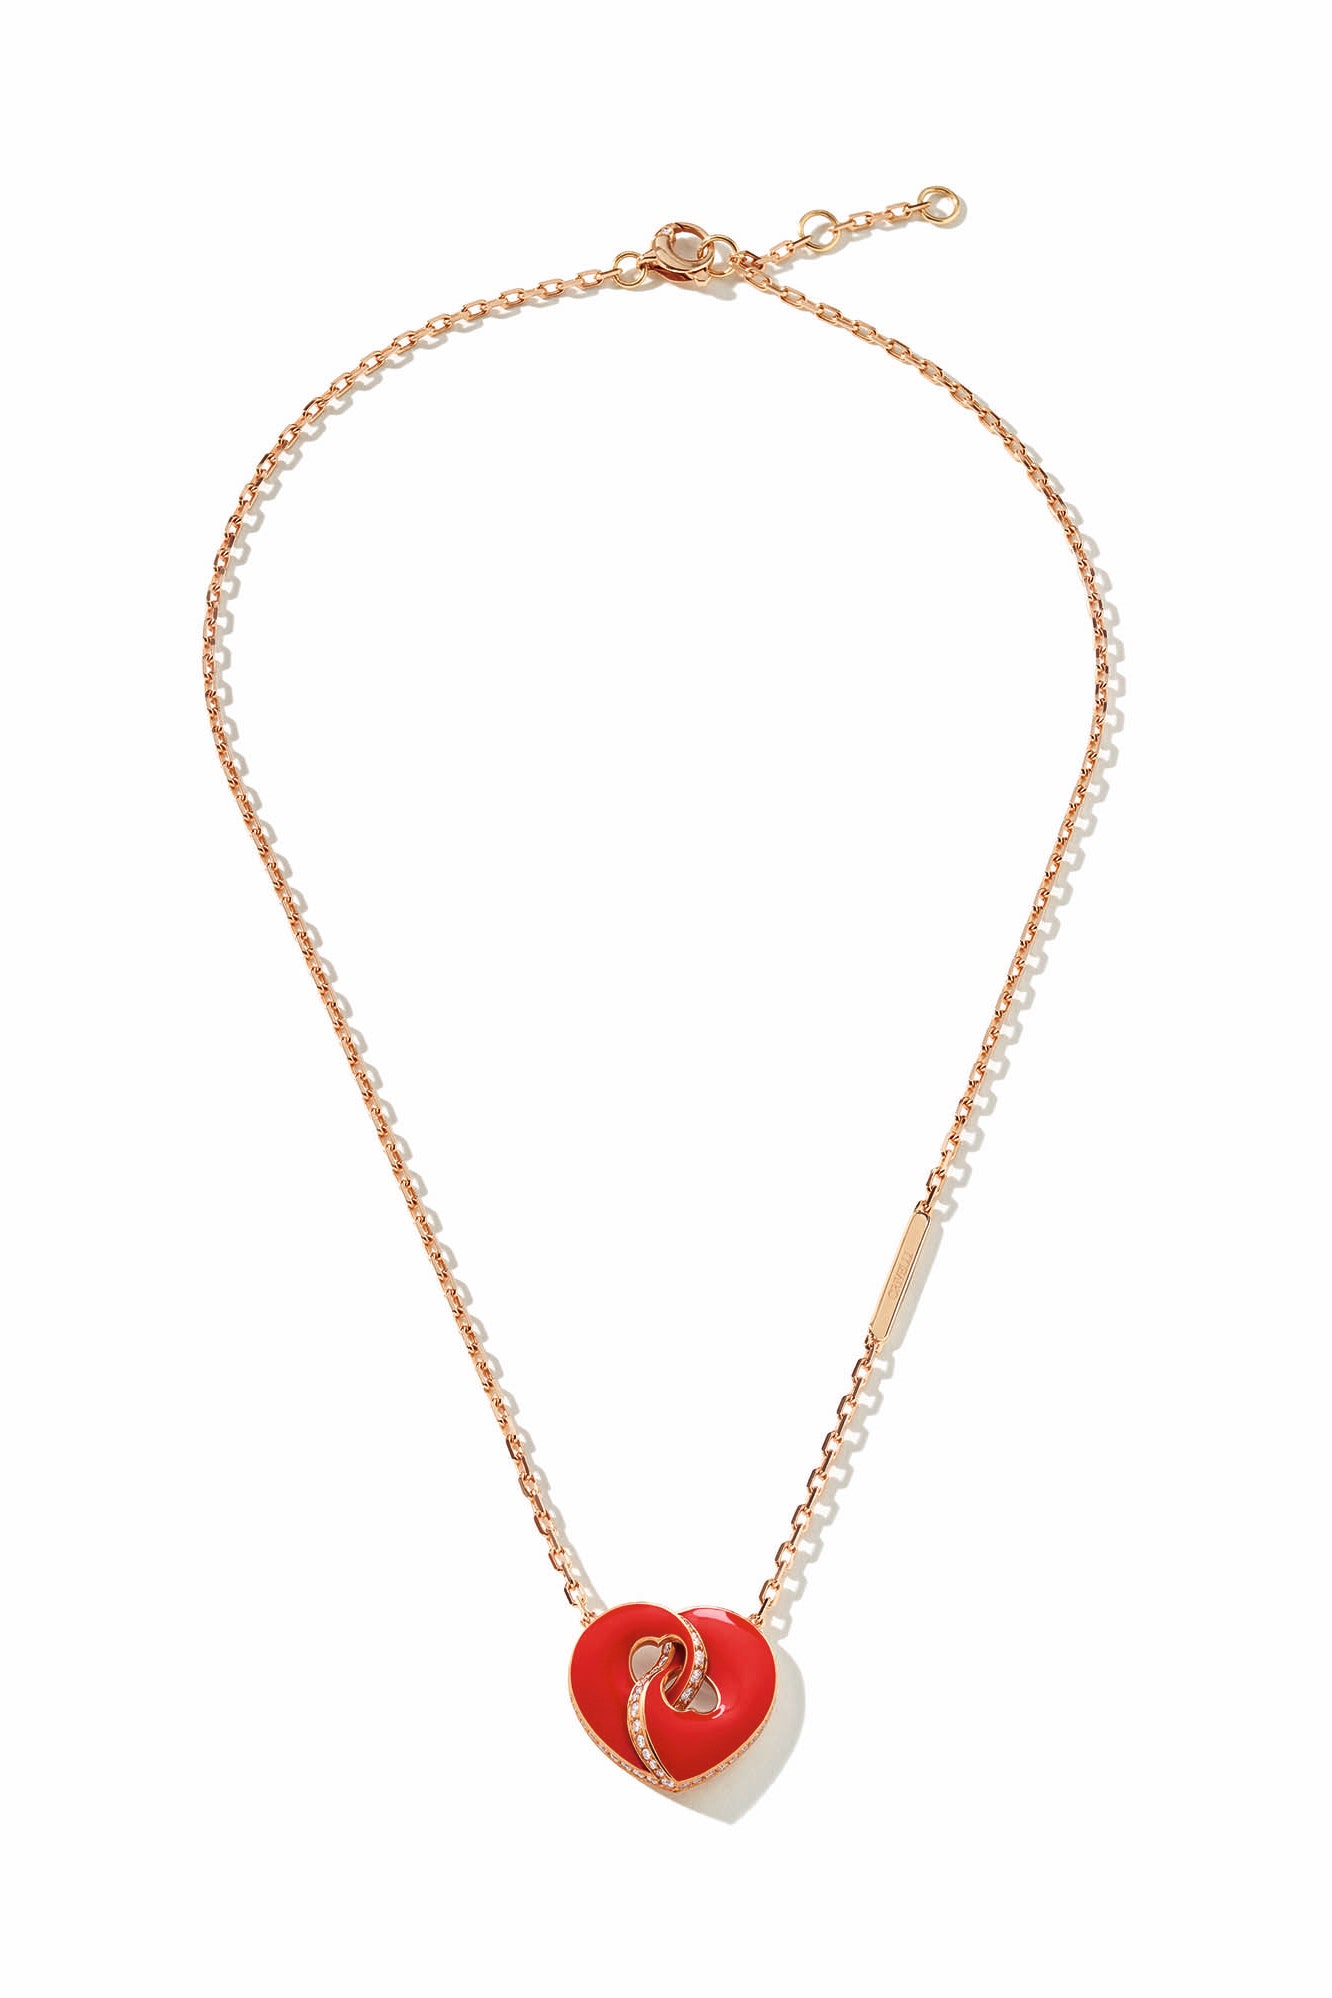 heart shaped gold necklace